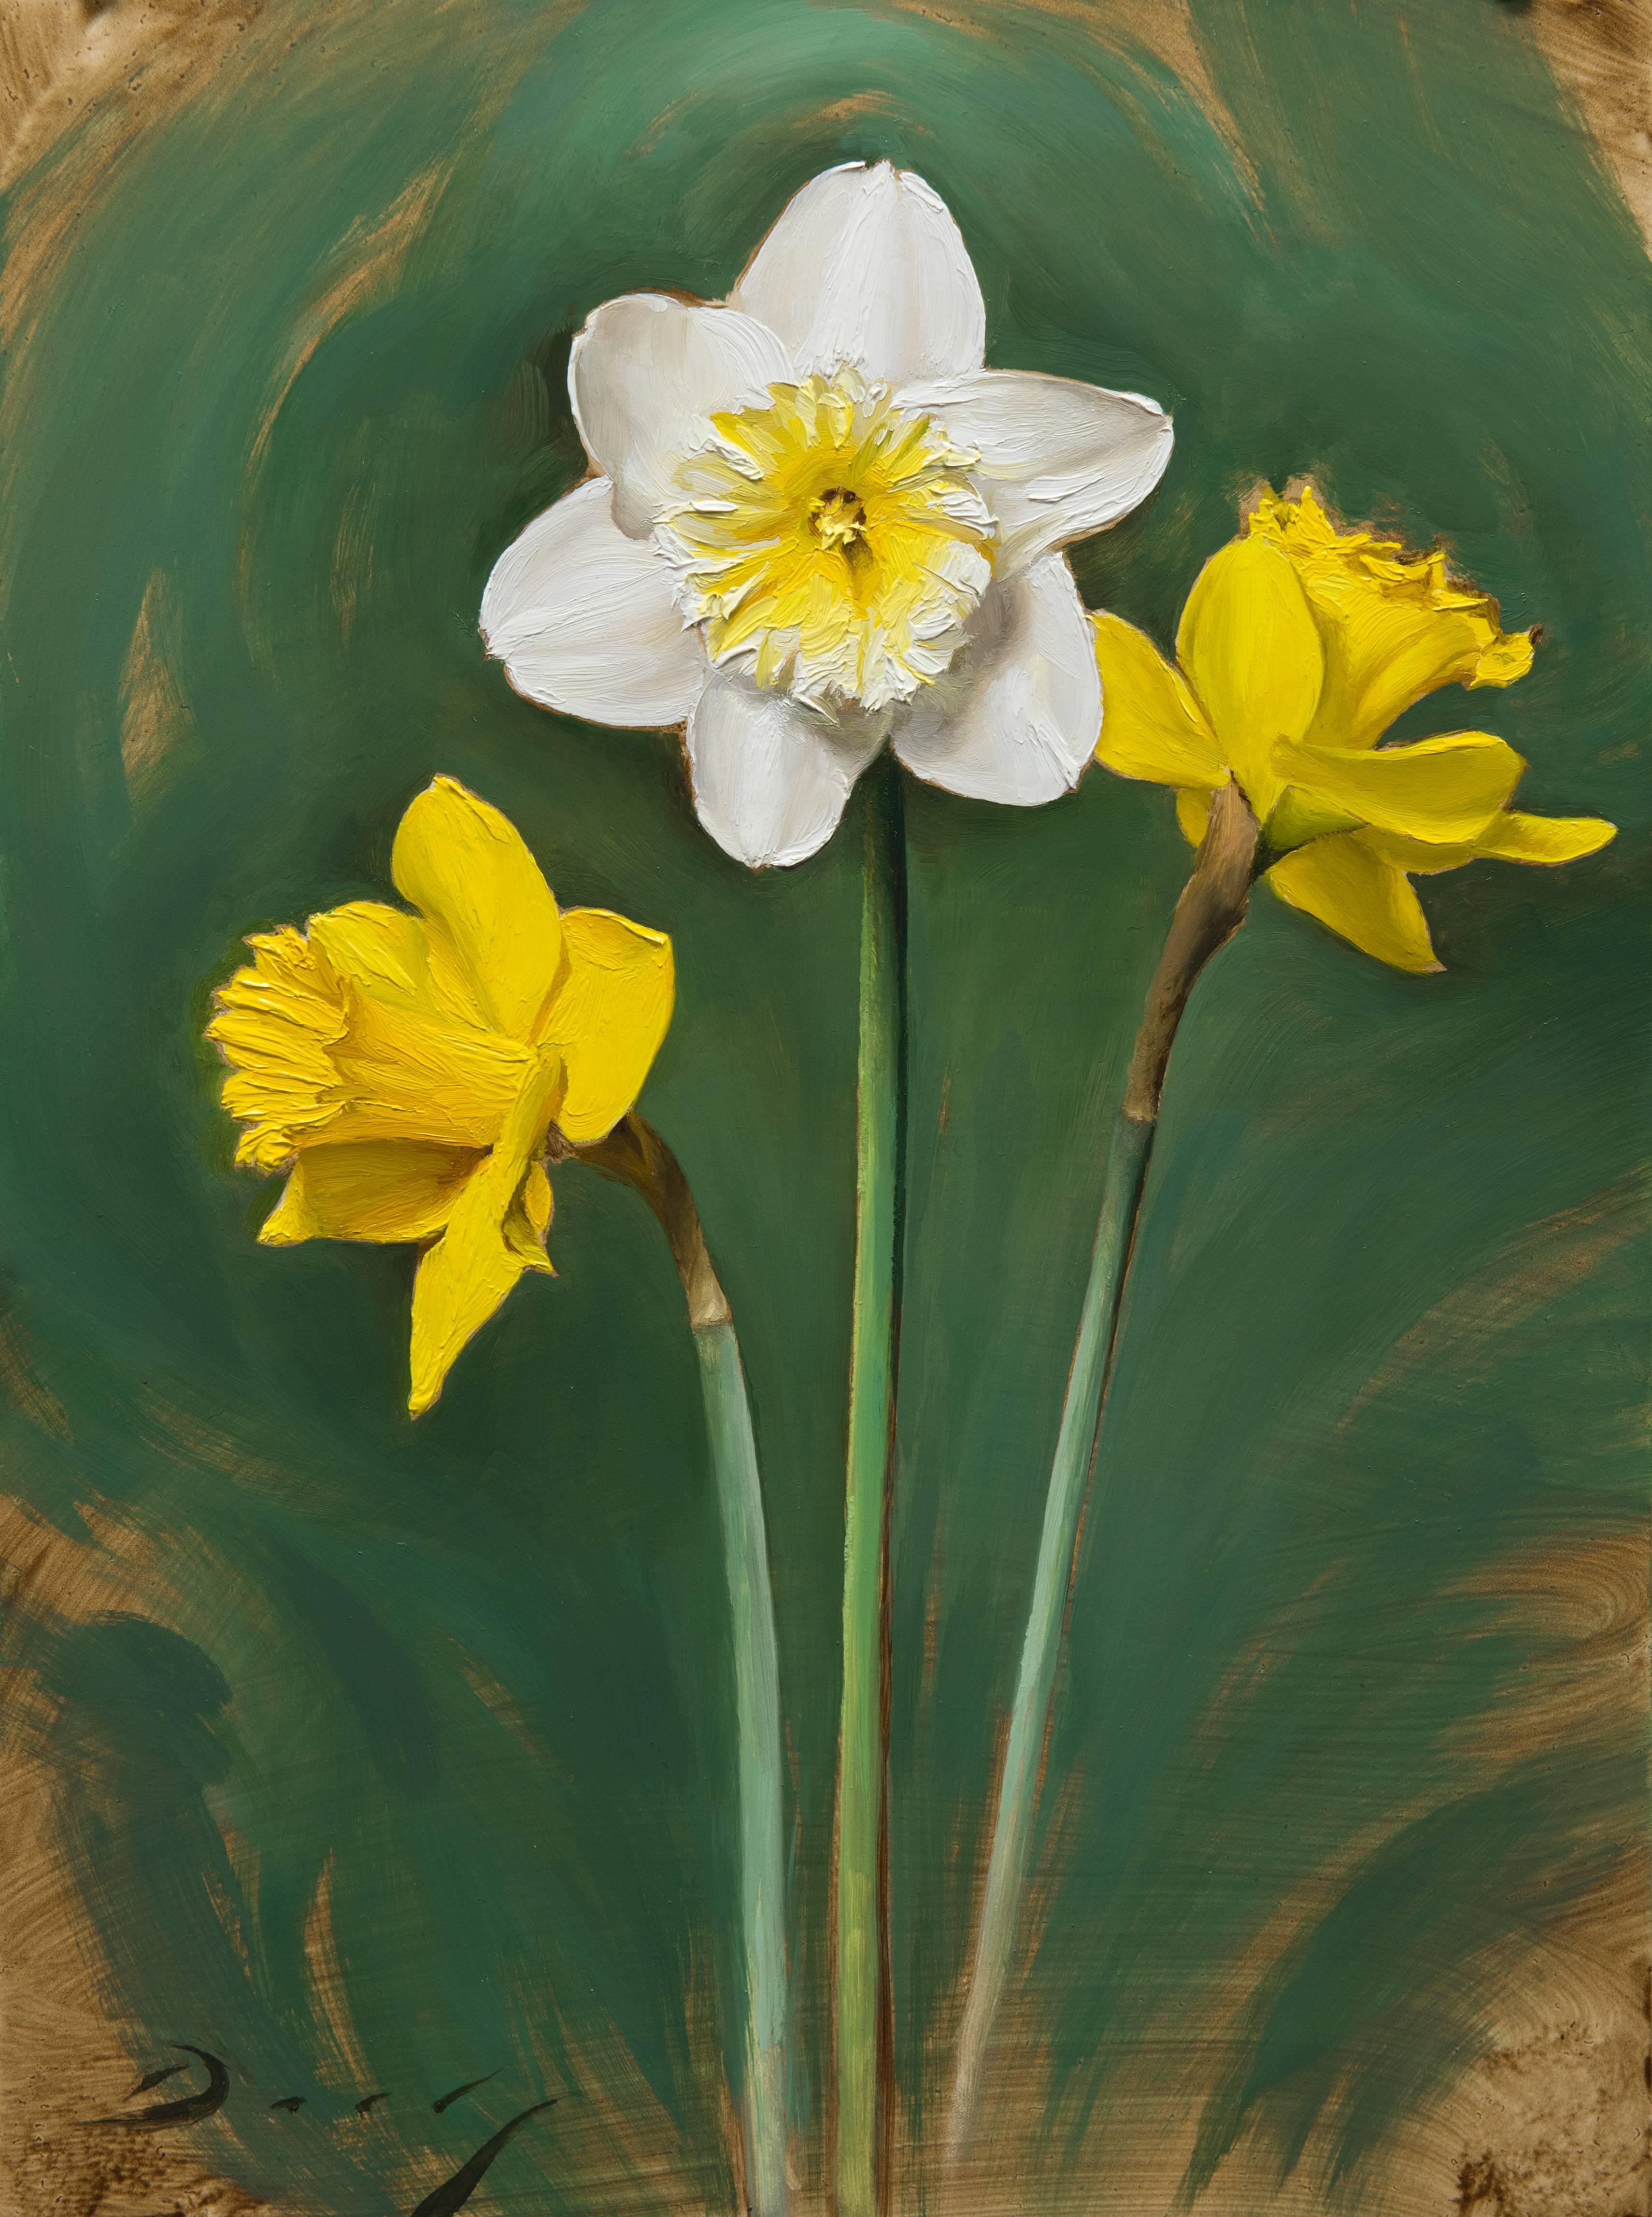 Joseph Q. Daily Still-Life Painting - Realist yellow white and green flowers, "Daffodils", oil on panel, 2017